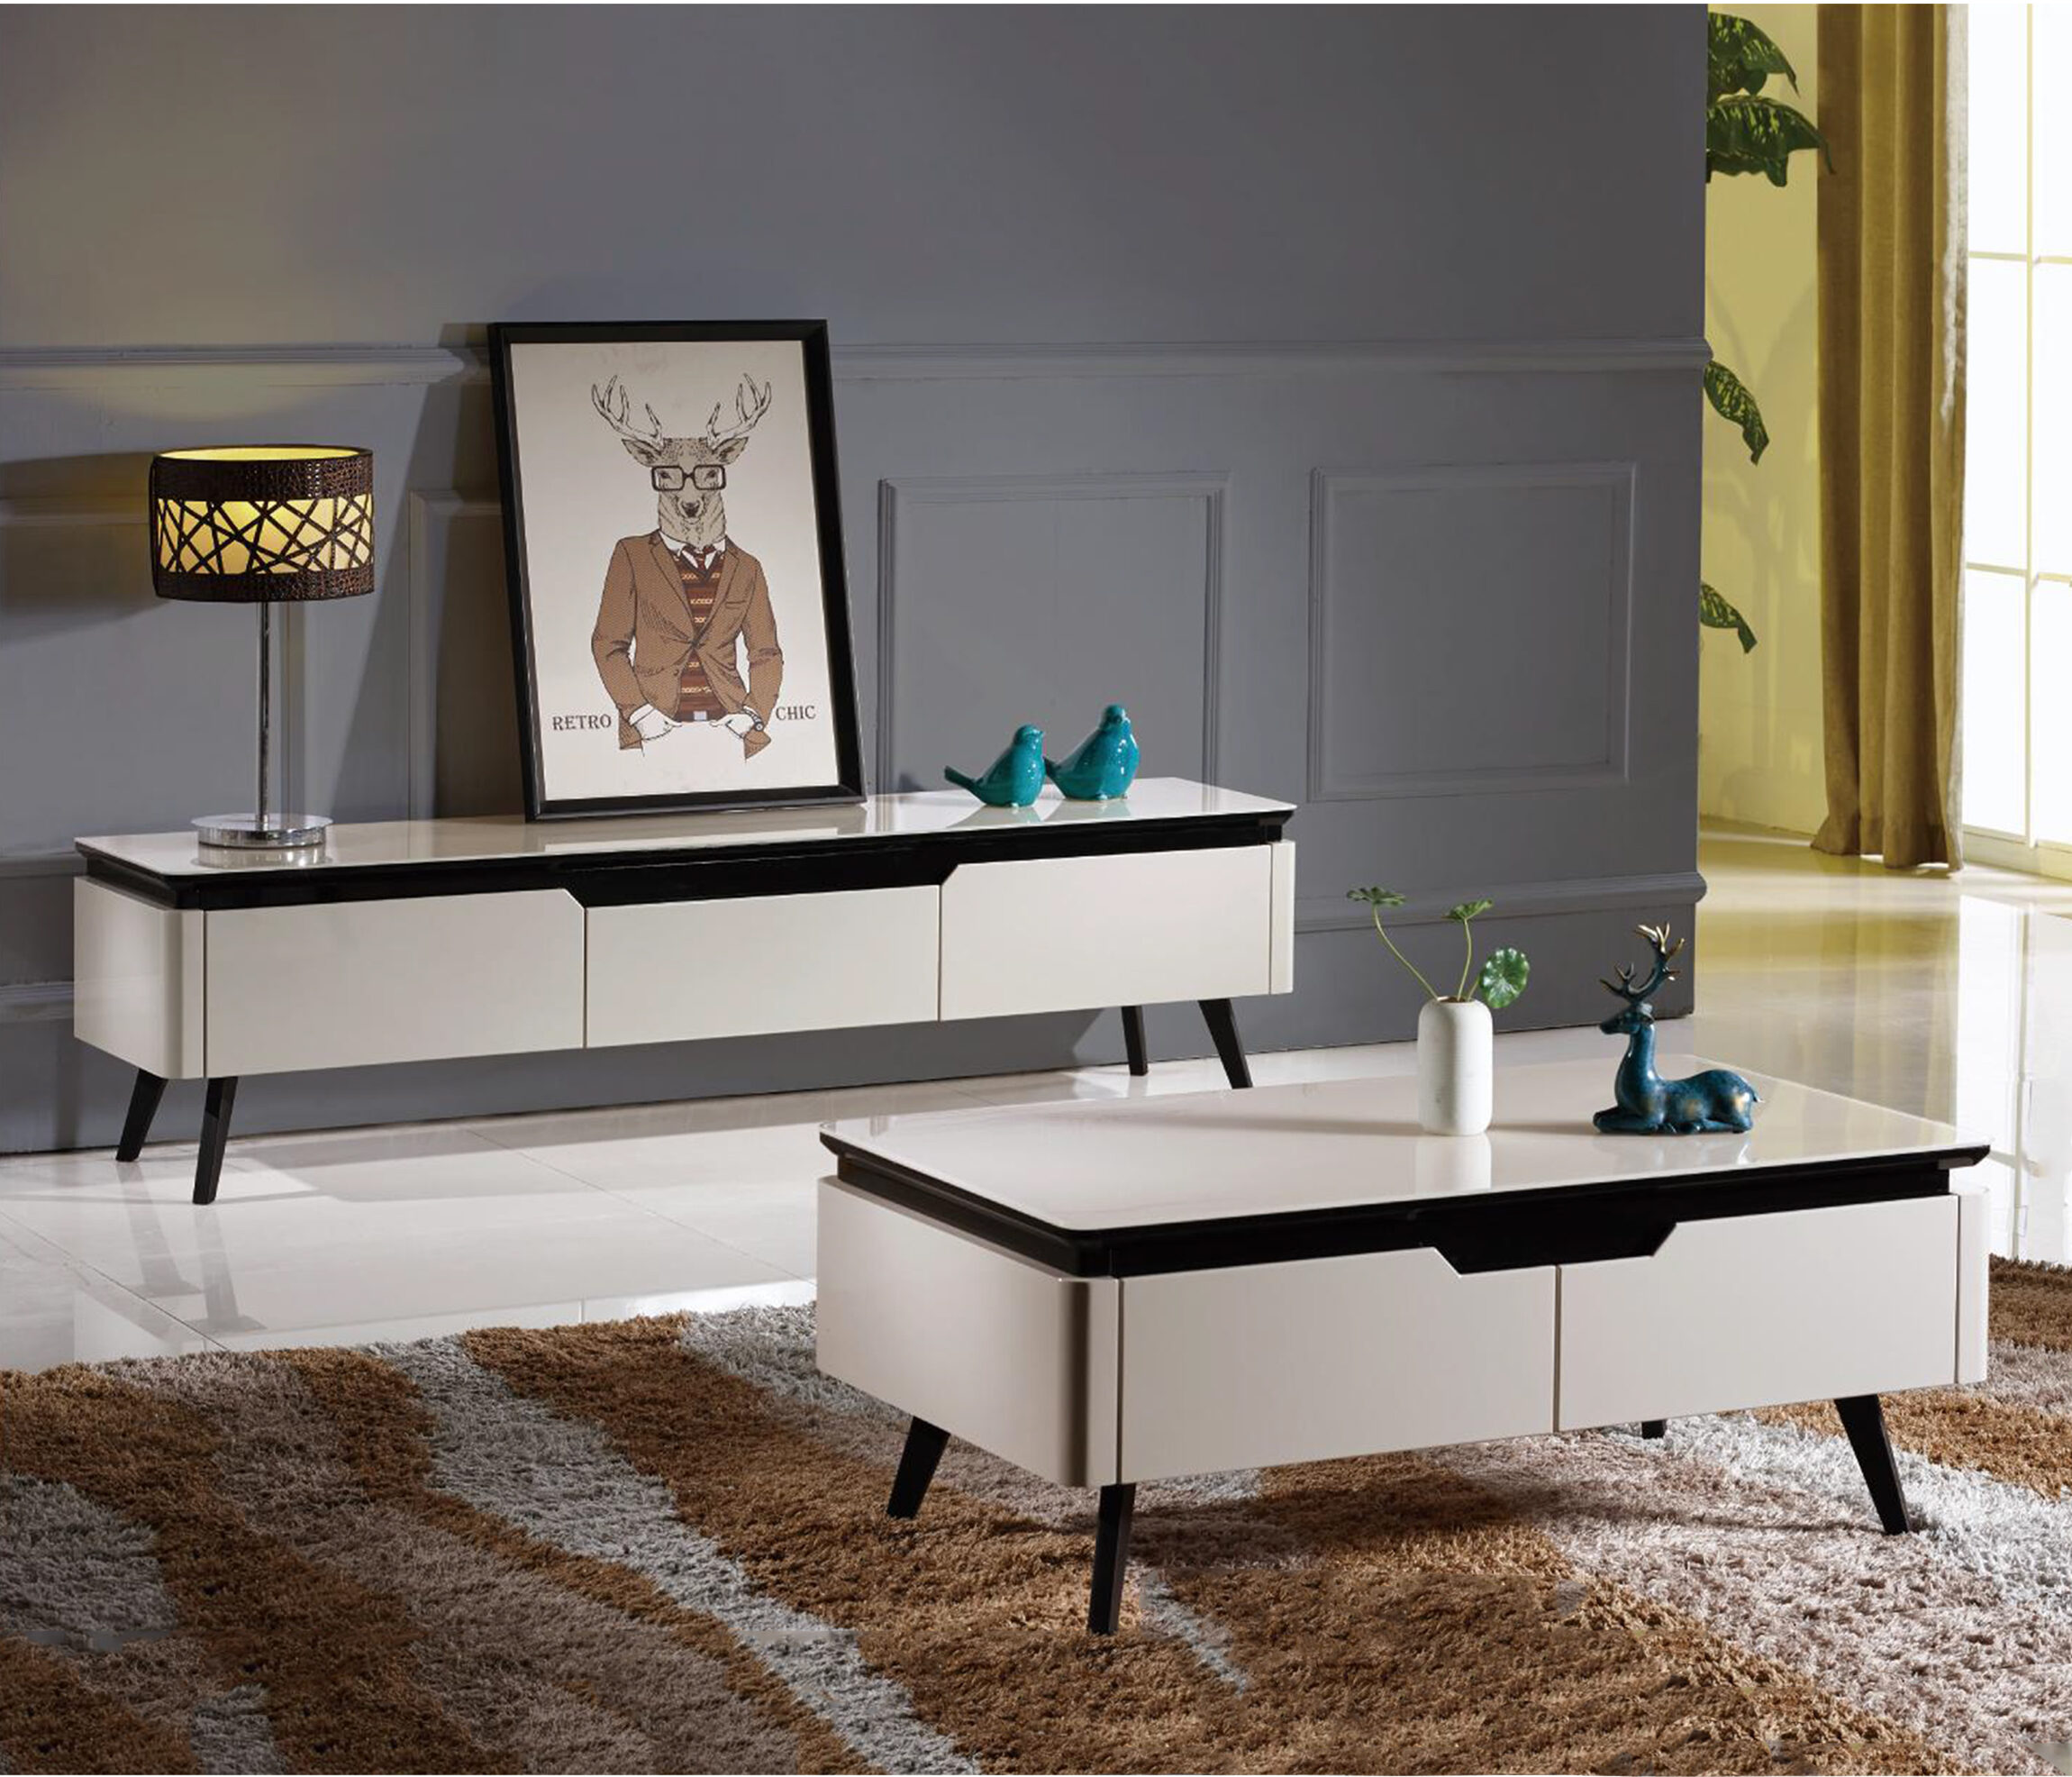 Coffee table | Side Table KT-99752CTWT malaysia kuala lumpur shah alam klang valley